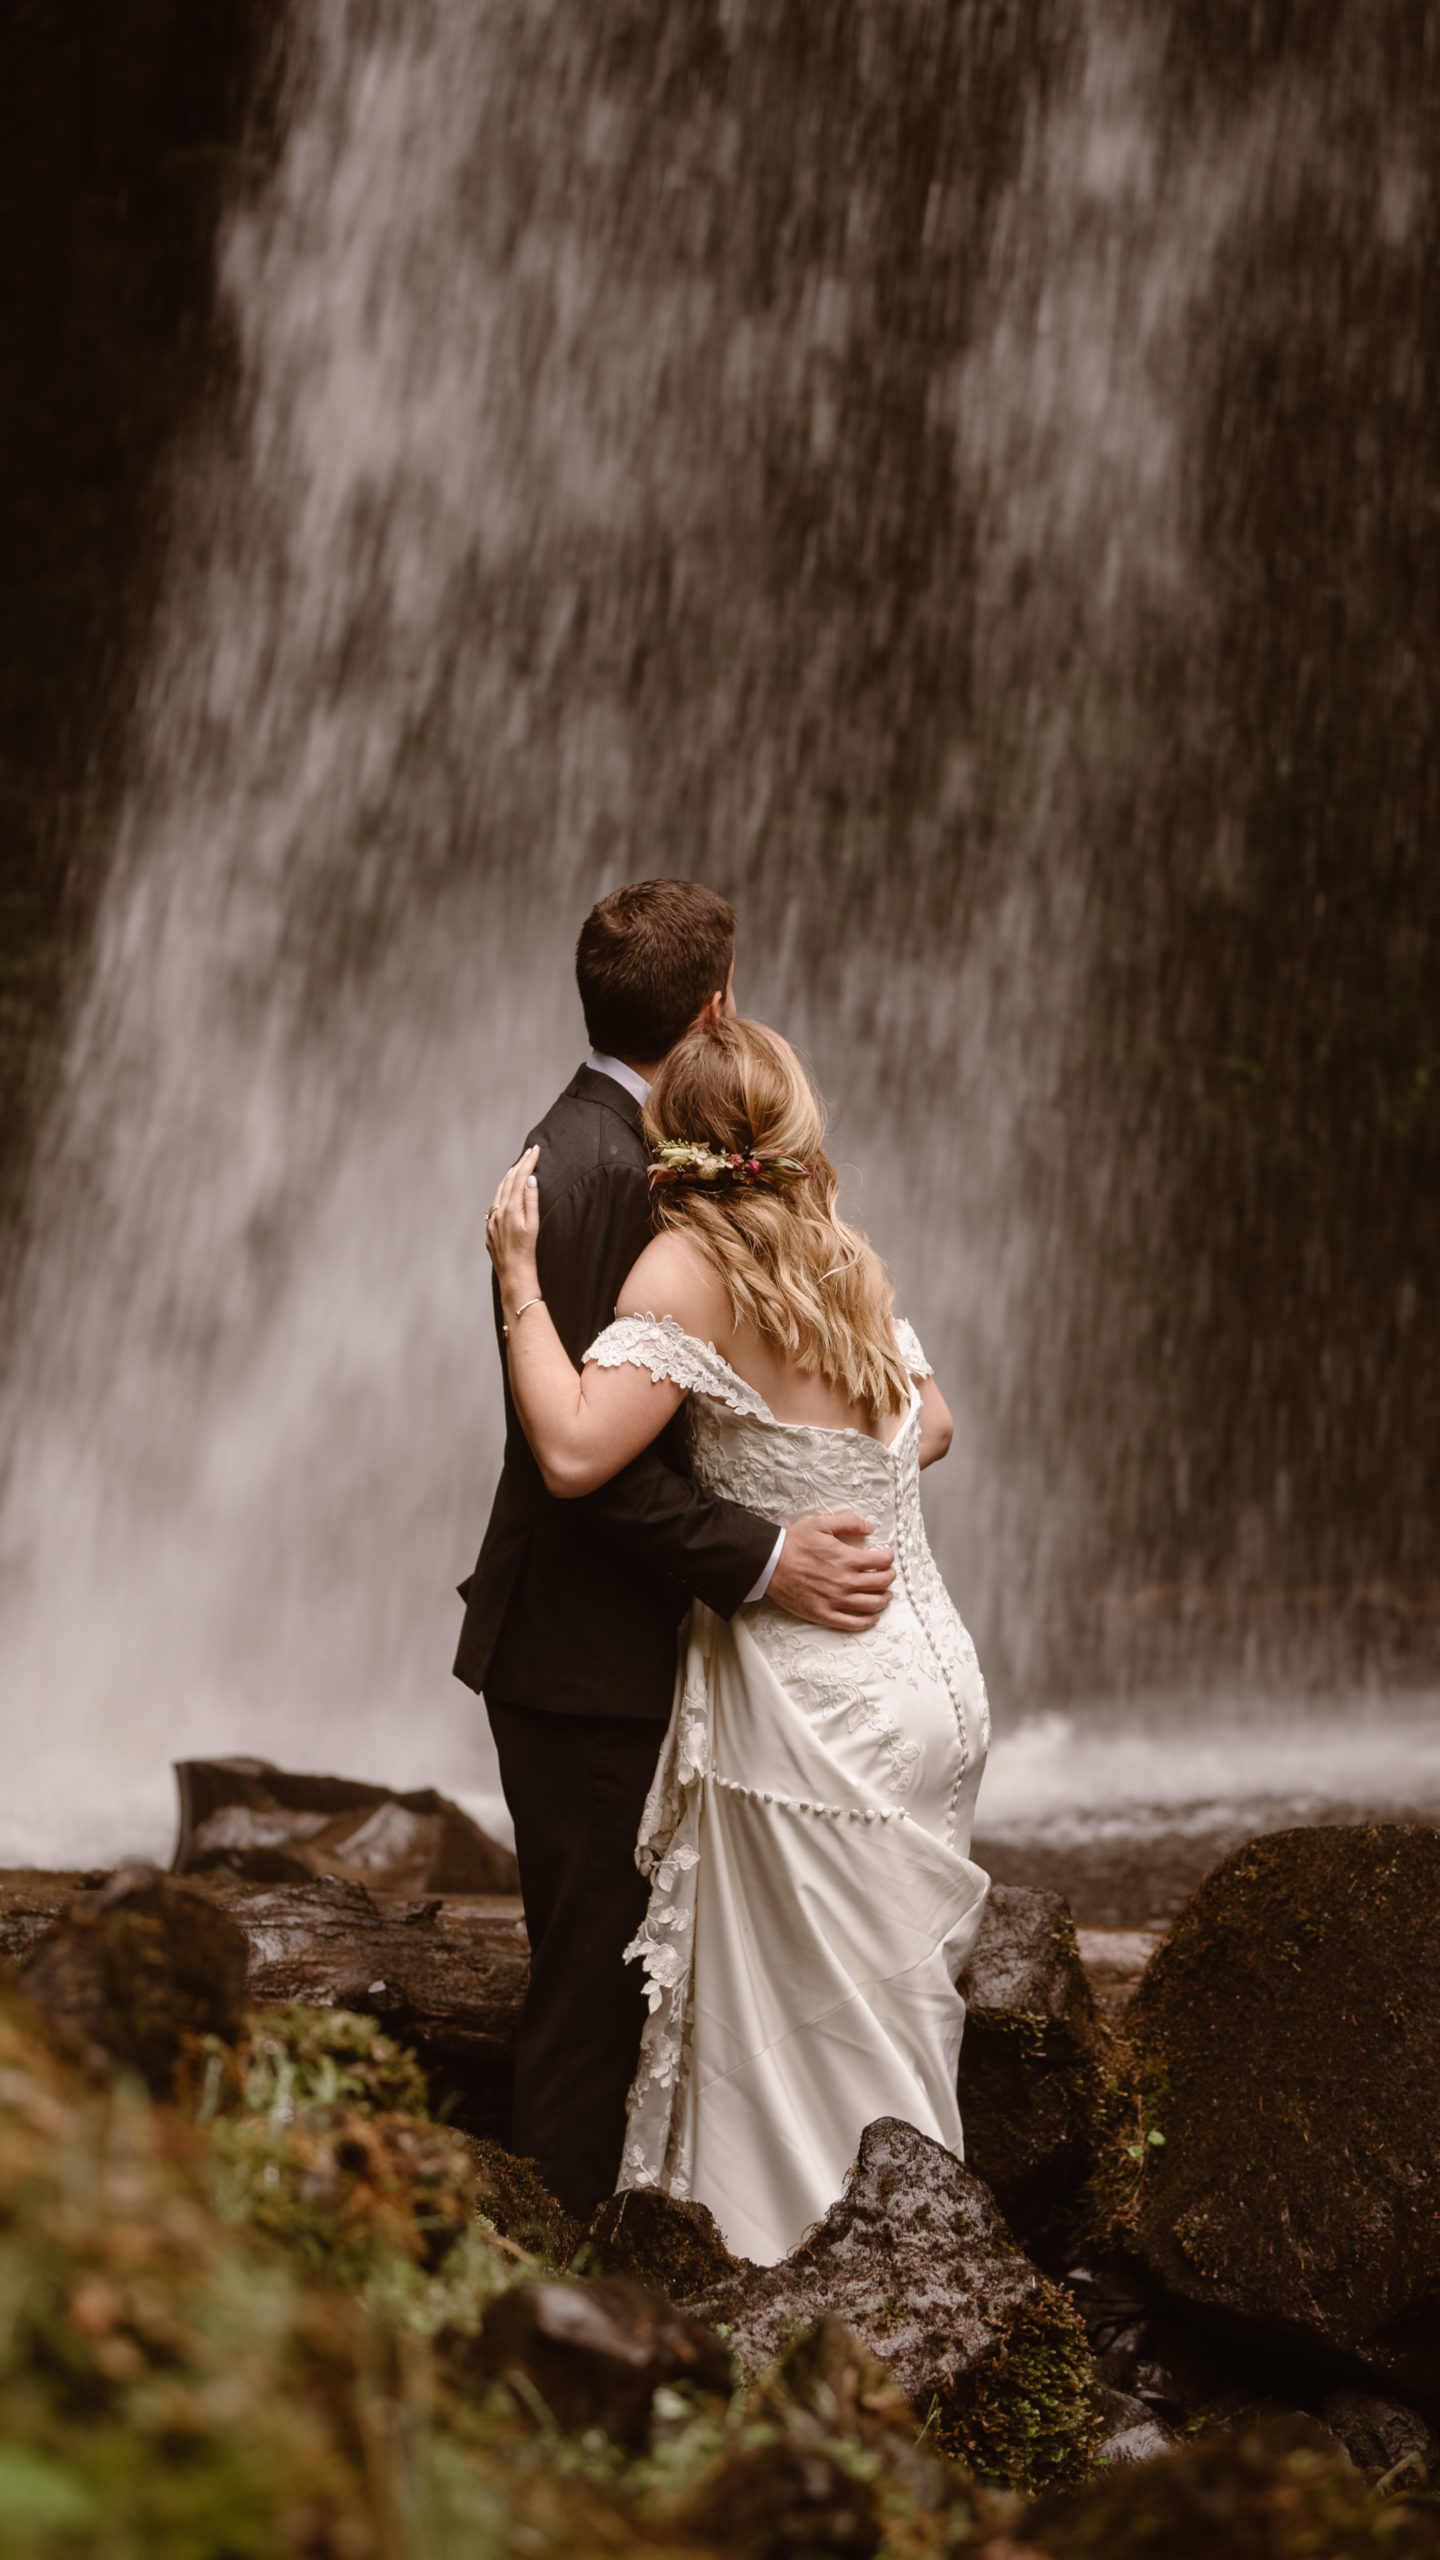 Ashley & Casey say their vows in front of Latorell Falls in Oregon